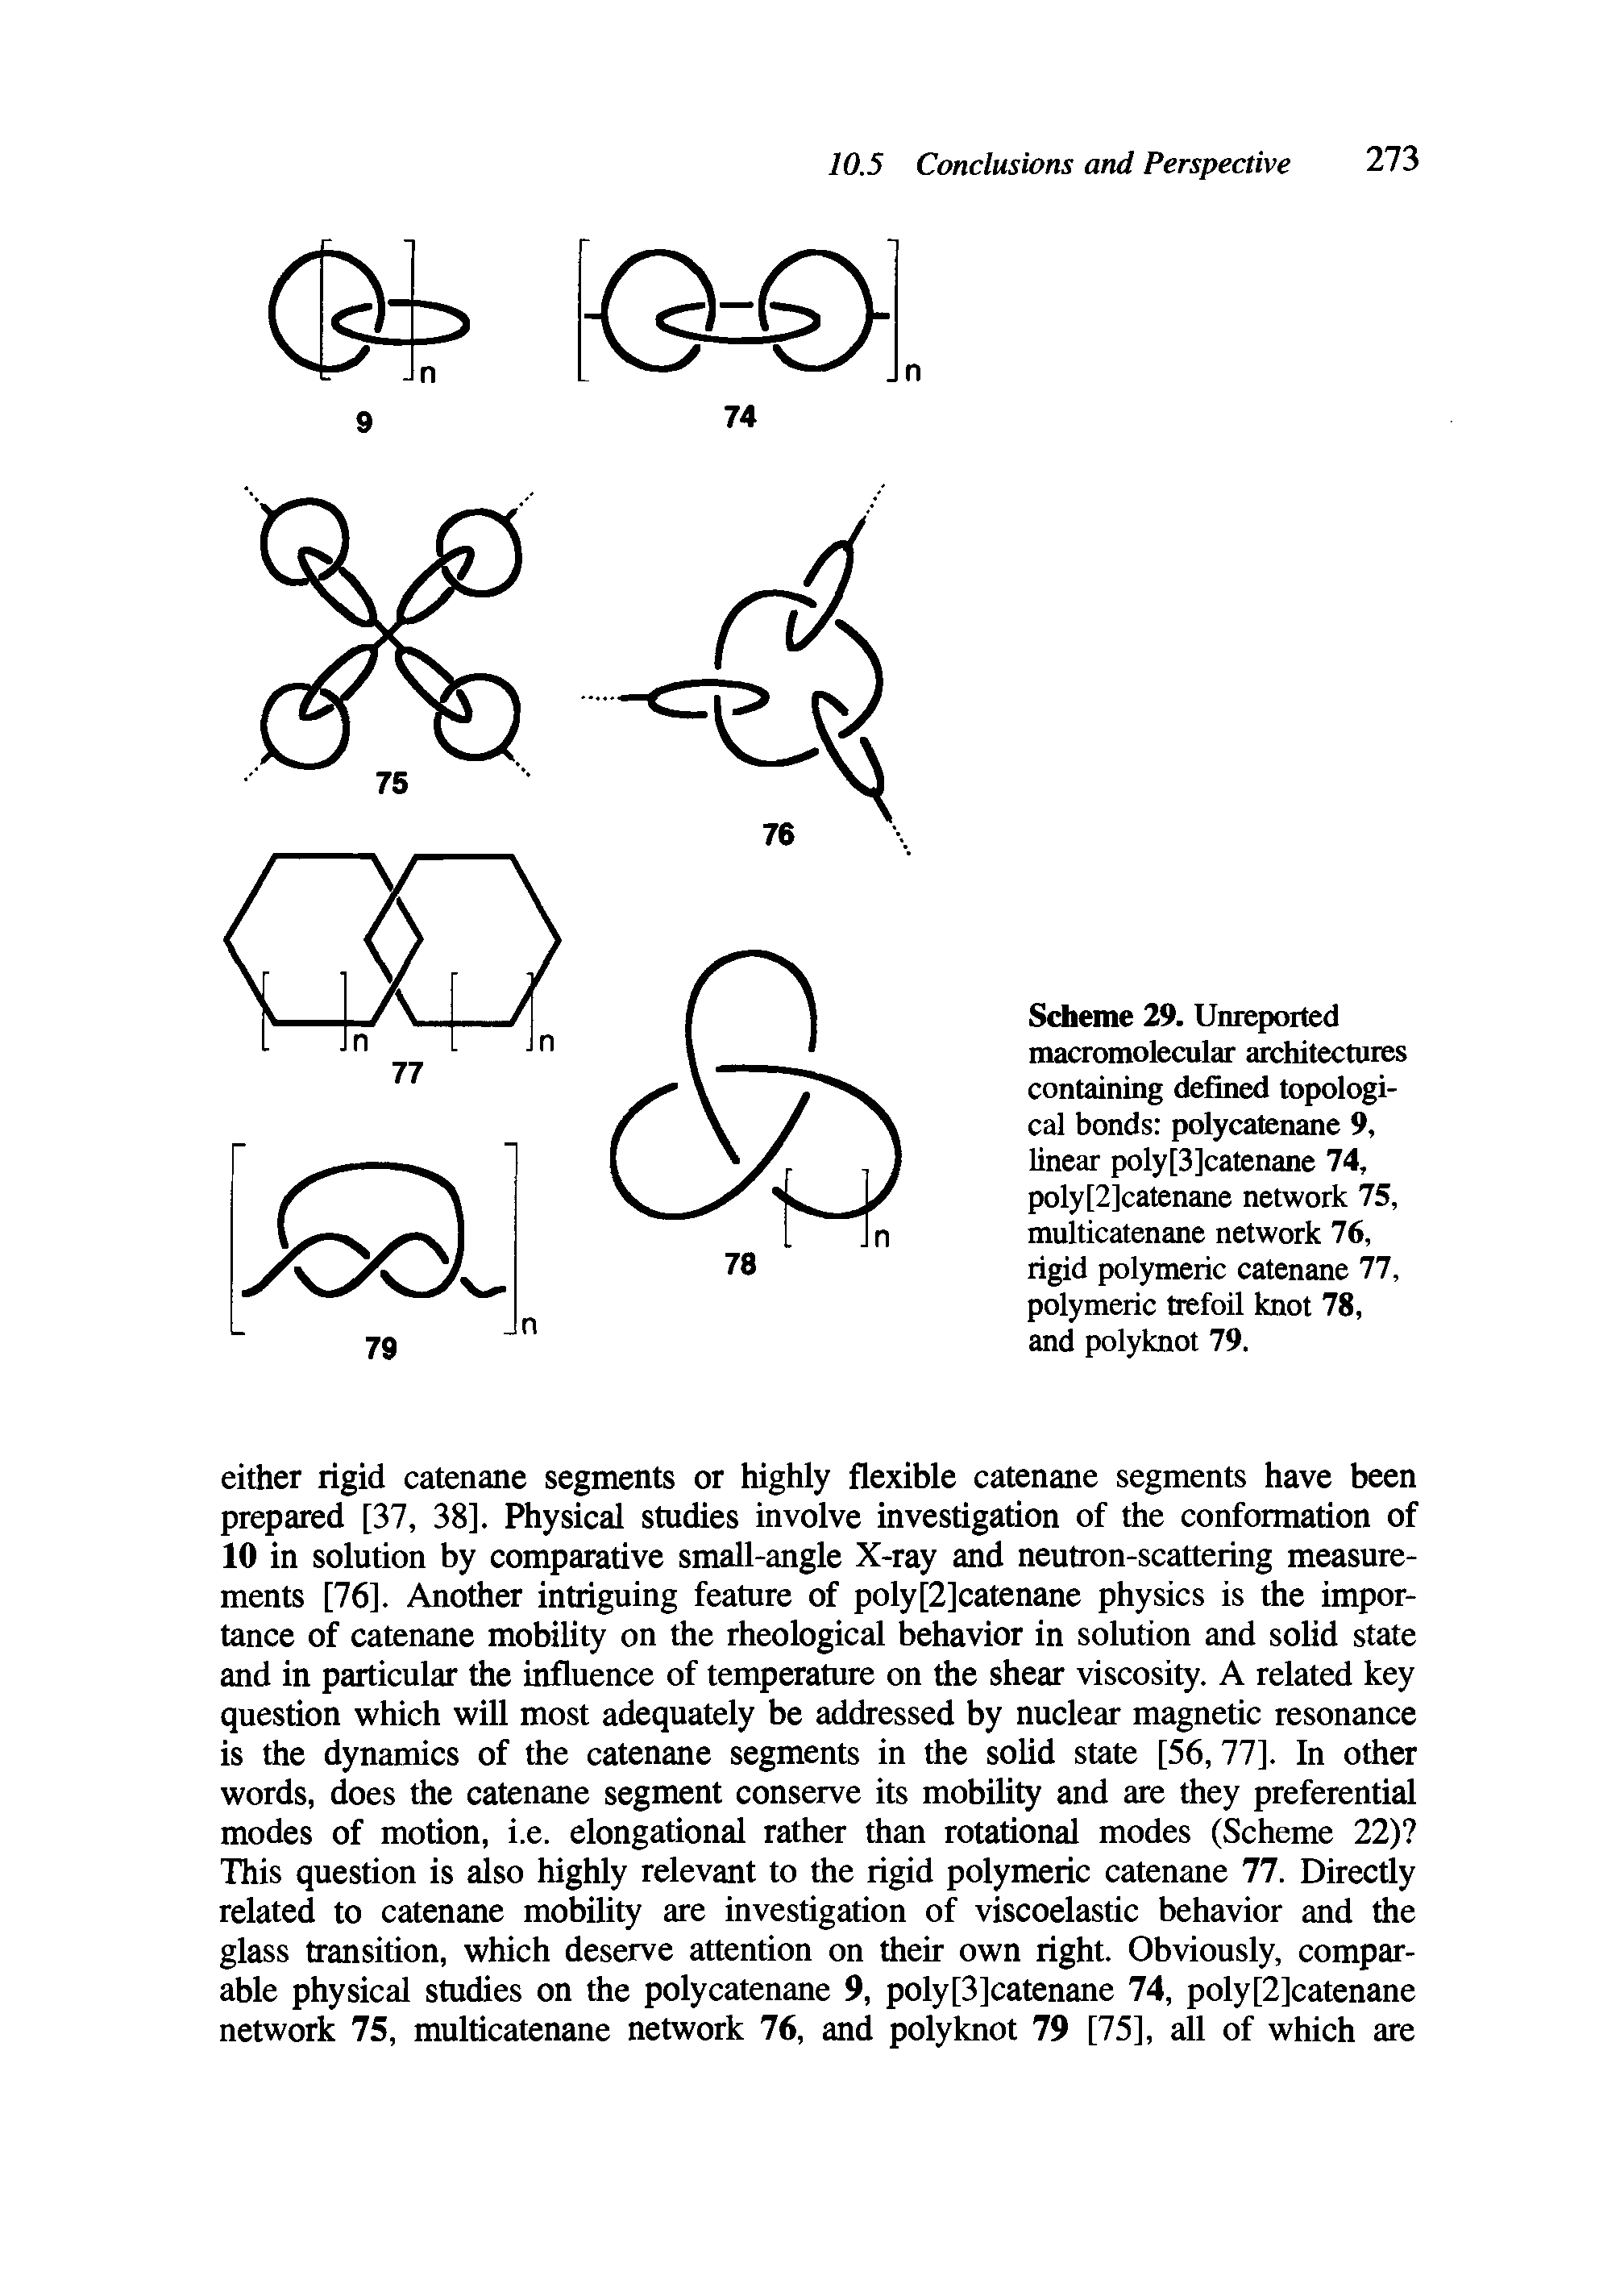 Scheme 29. Unreported macromolecular architectures containing defined topological bonds polycatenane 9, linear poly[3]catenane 74, poly[2]catenane network 75, multicatenane network 76, rigid polymeric catenane 77, polymeric trefoil knot 78, and polyknot 79.